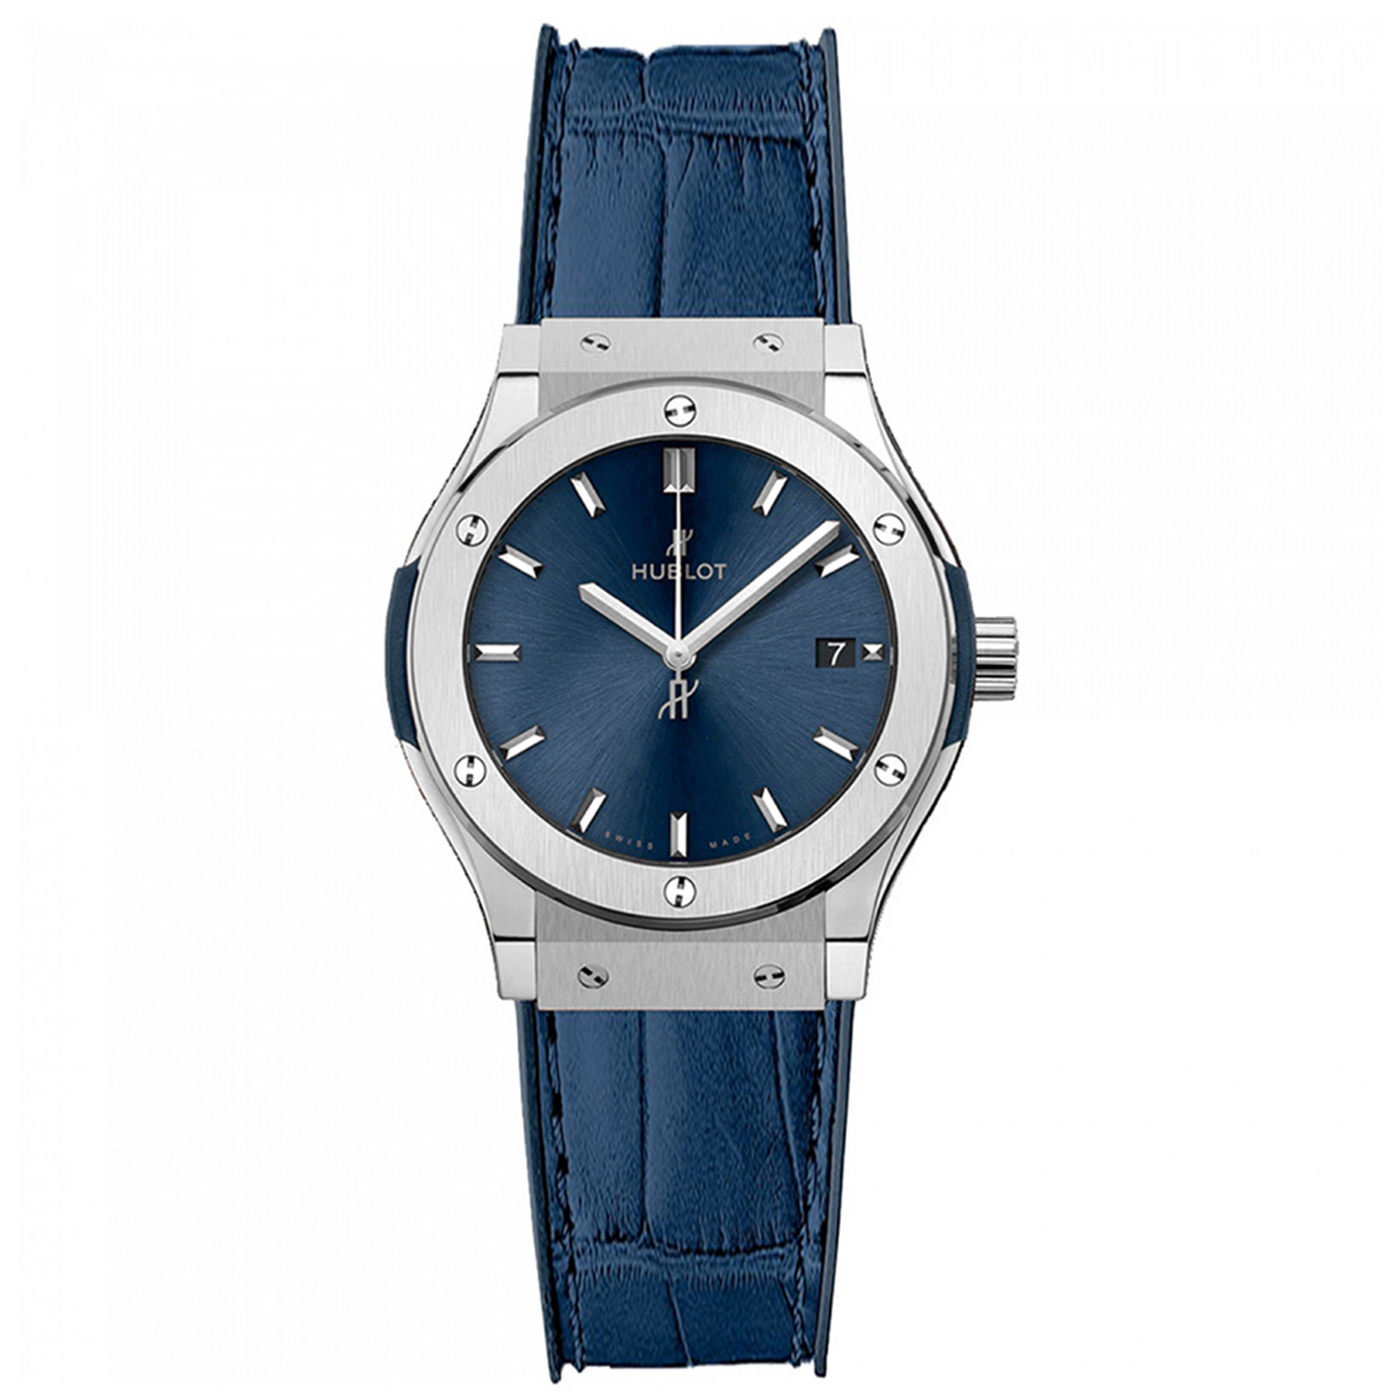 Hublot Classic Fusion - Titanium Blue 33mm - Gharyal by Collectibles 